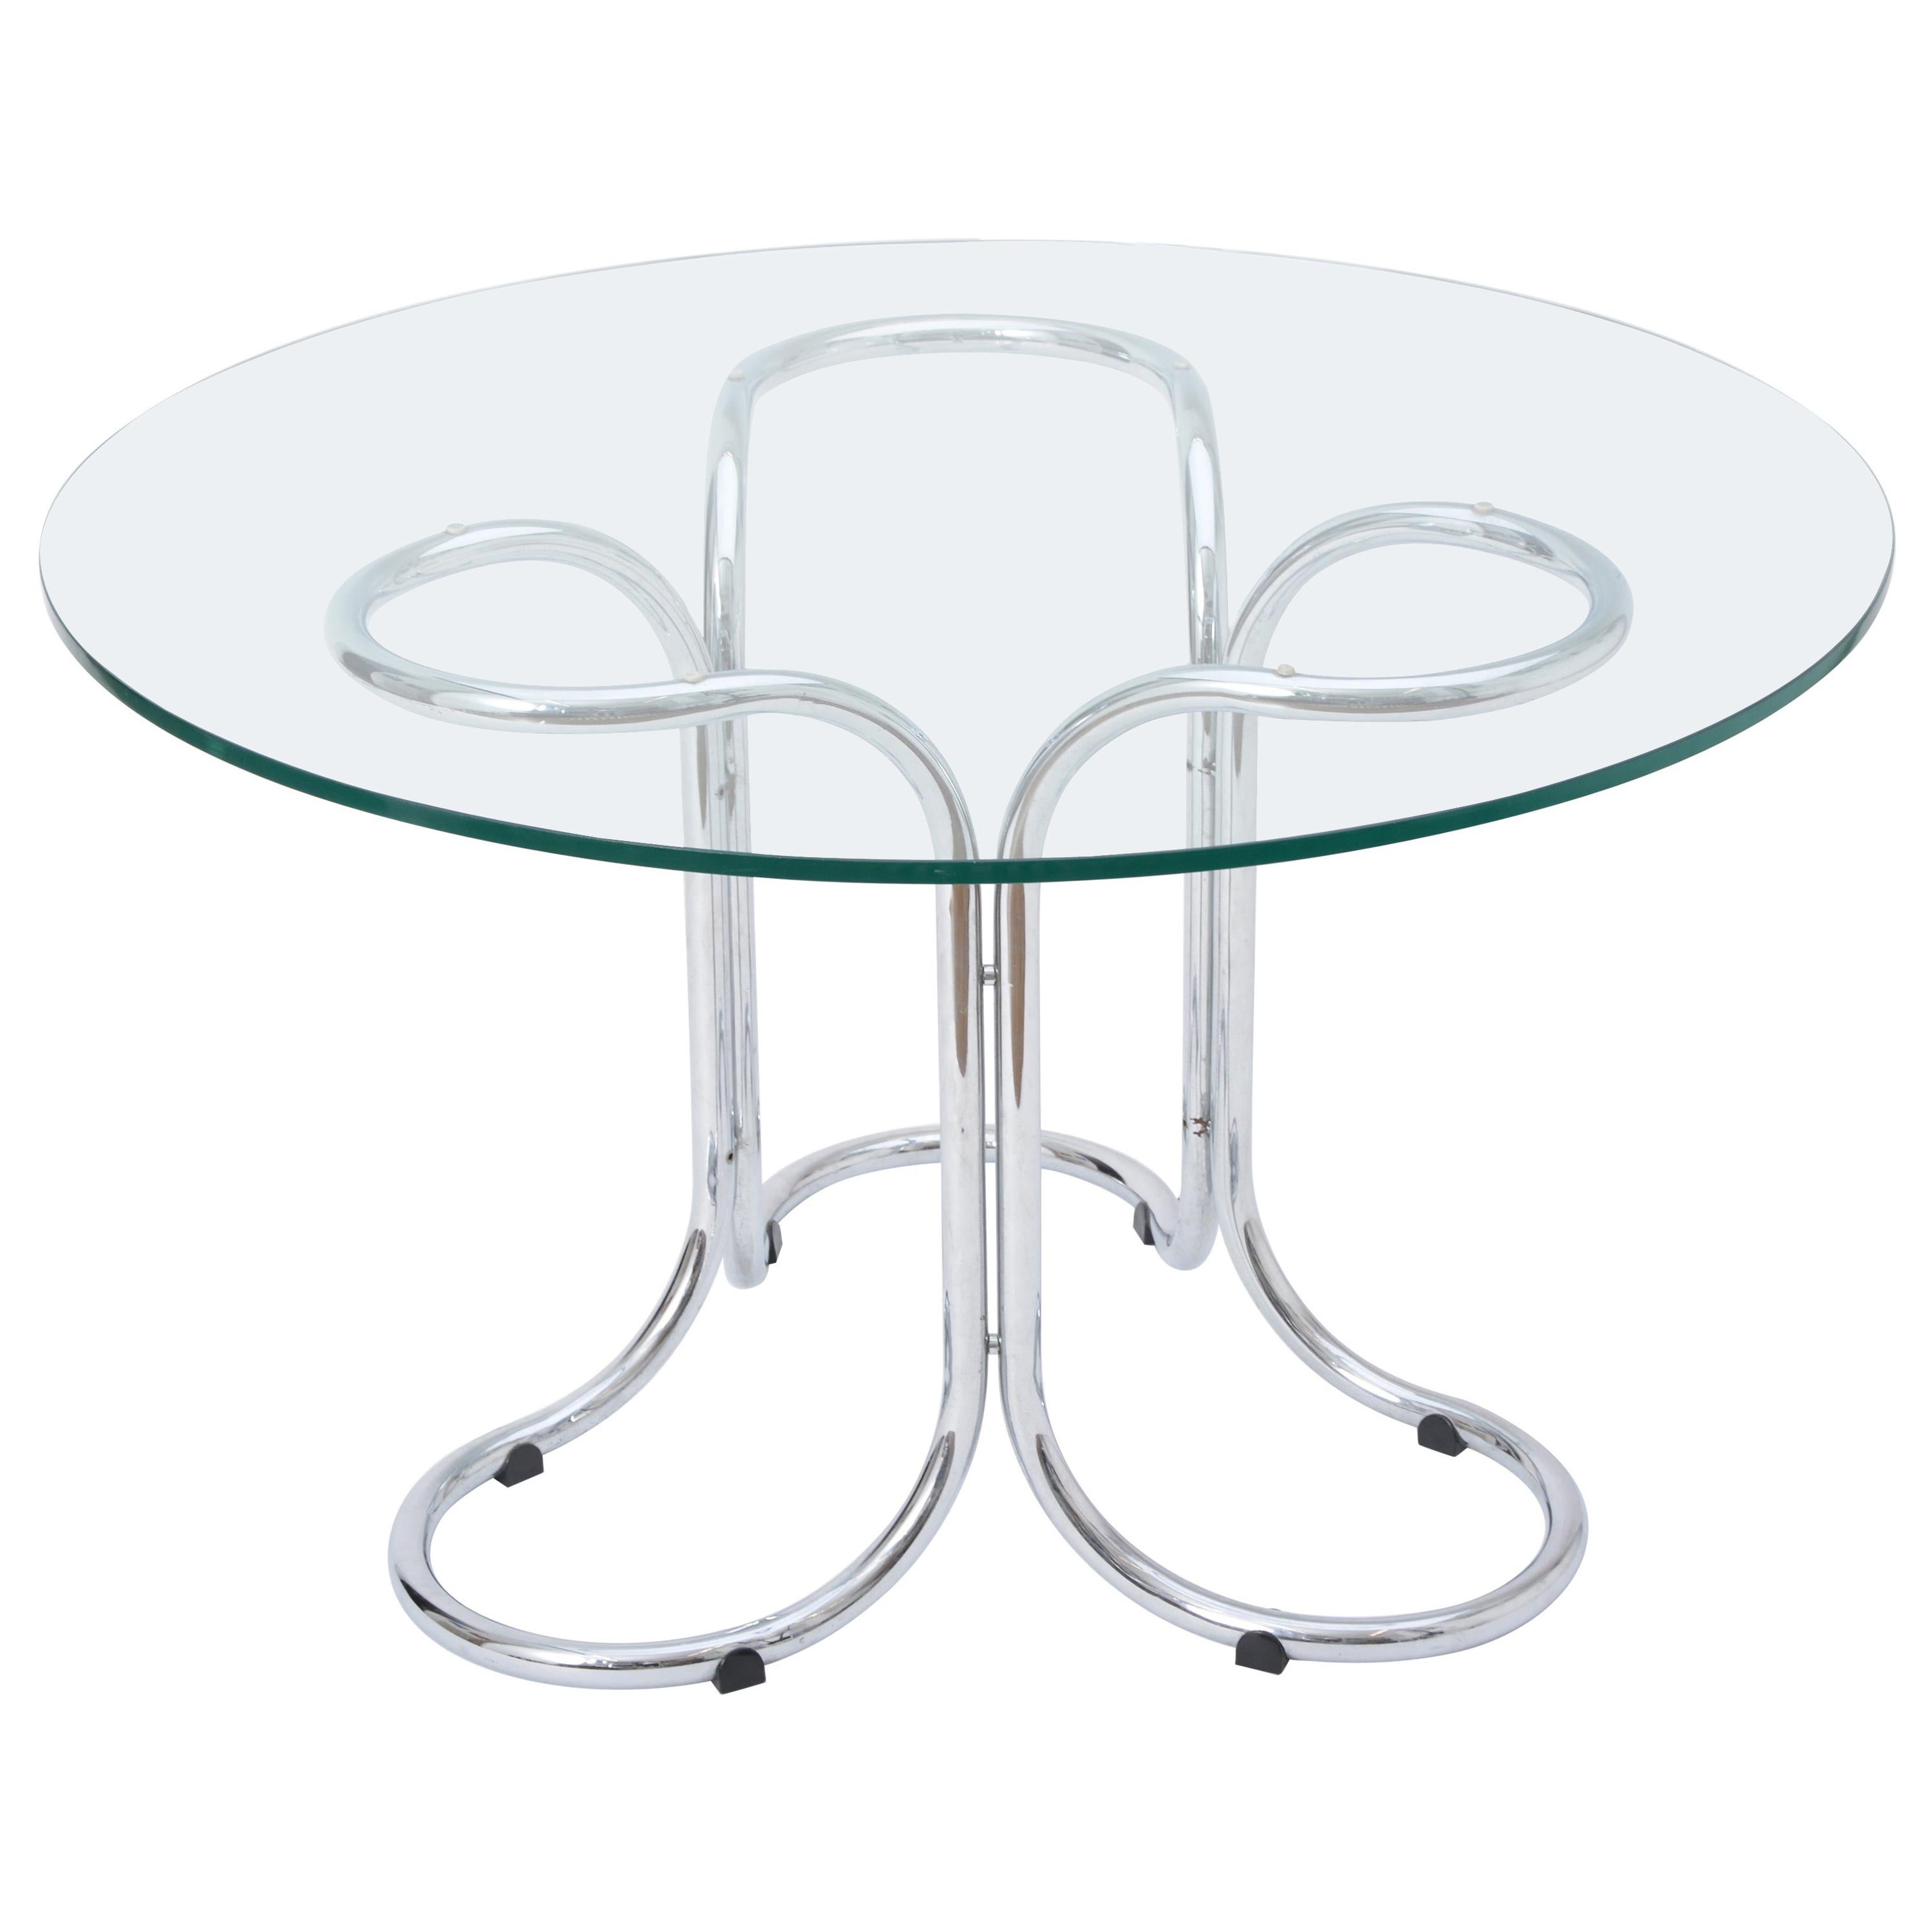 Circular Mid-Century Modern Glass Table in the Style of Giotto Stoppino